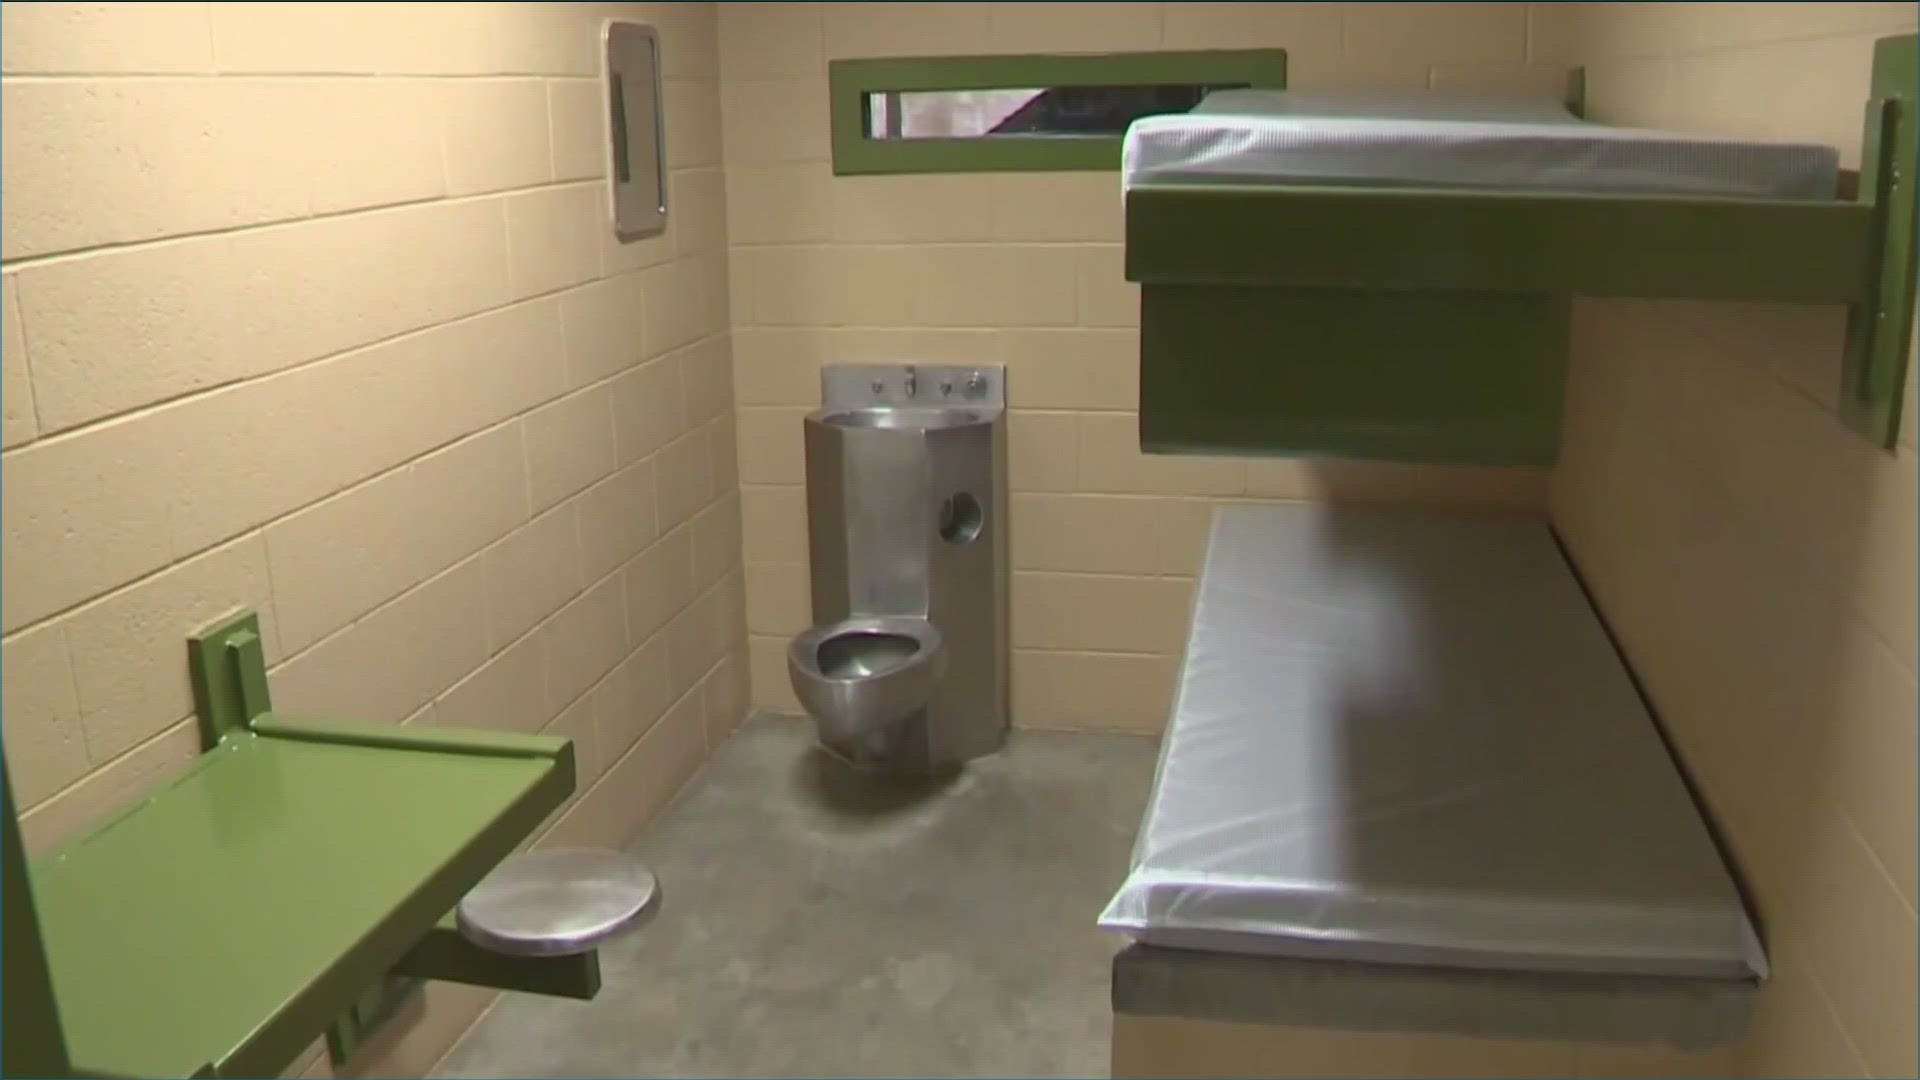 Activists say 1 out of 3 inmates require medication to treat mental illness.